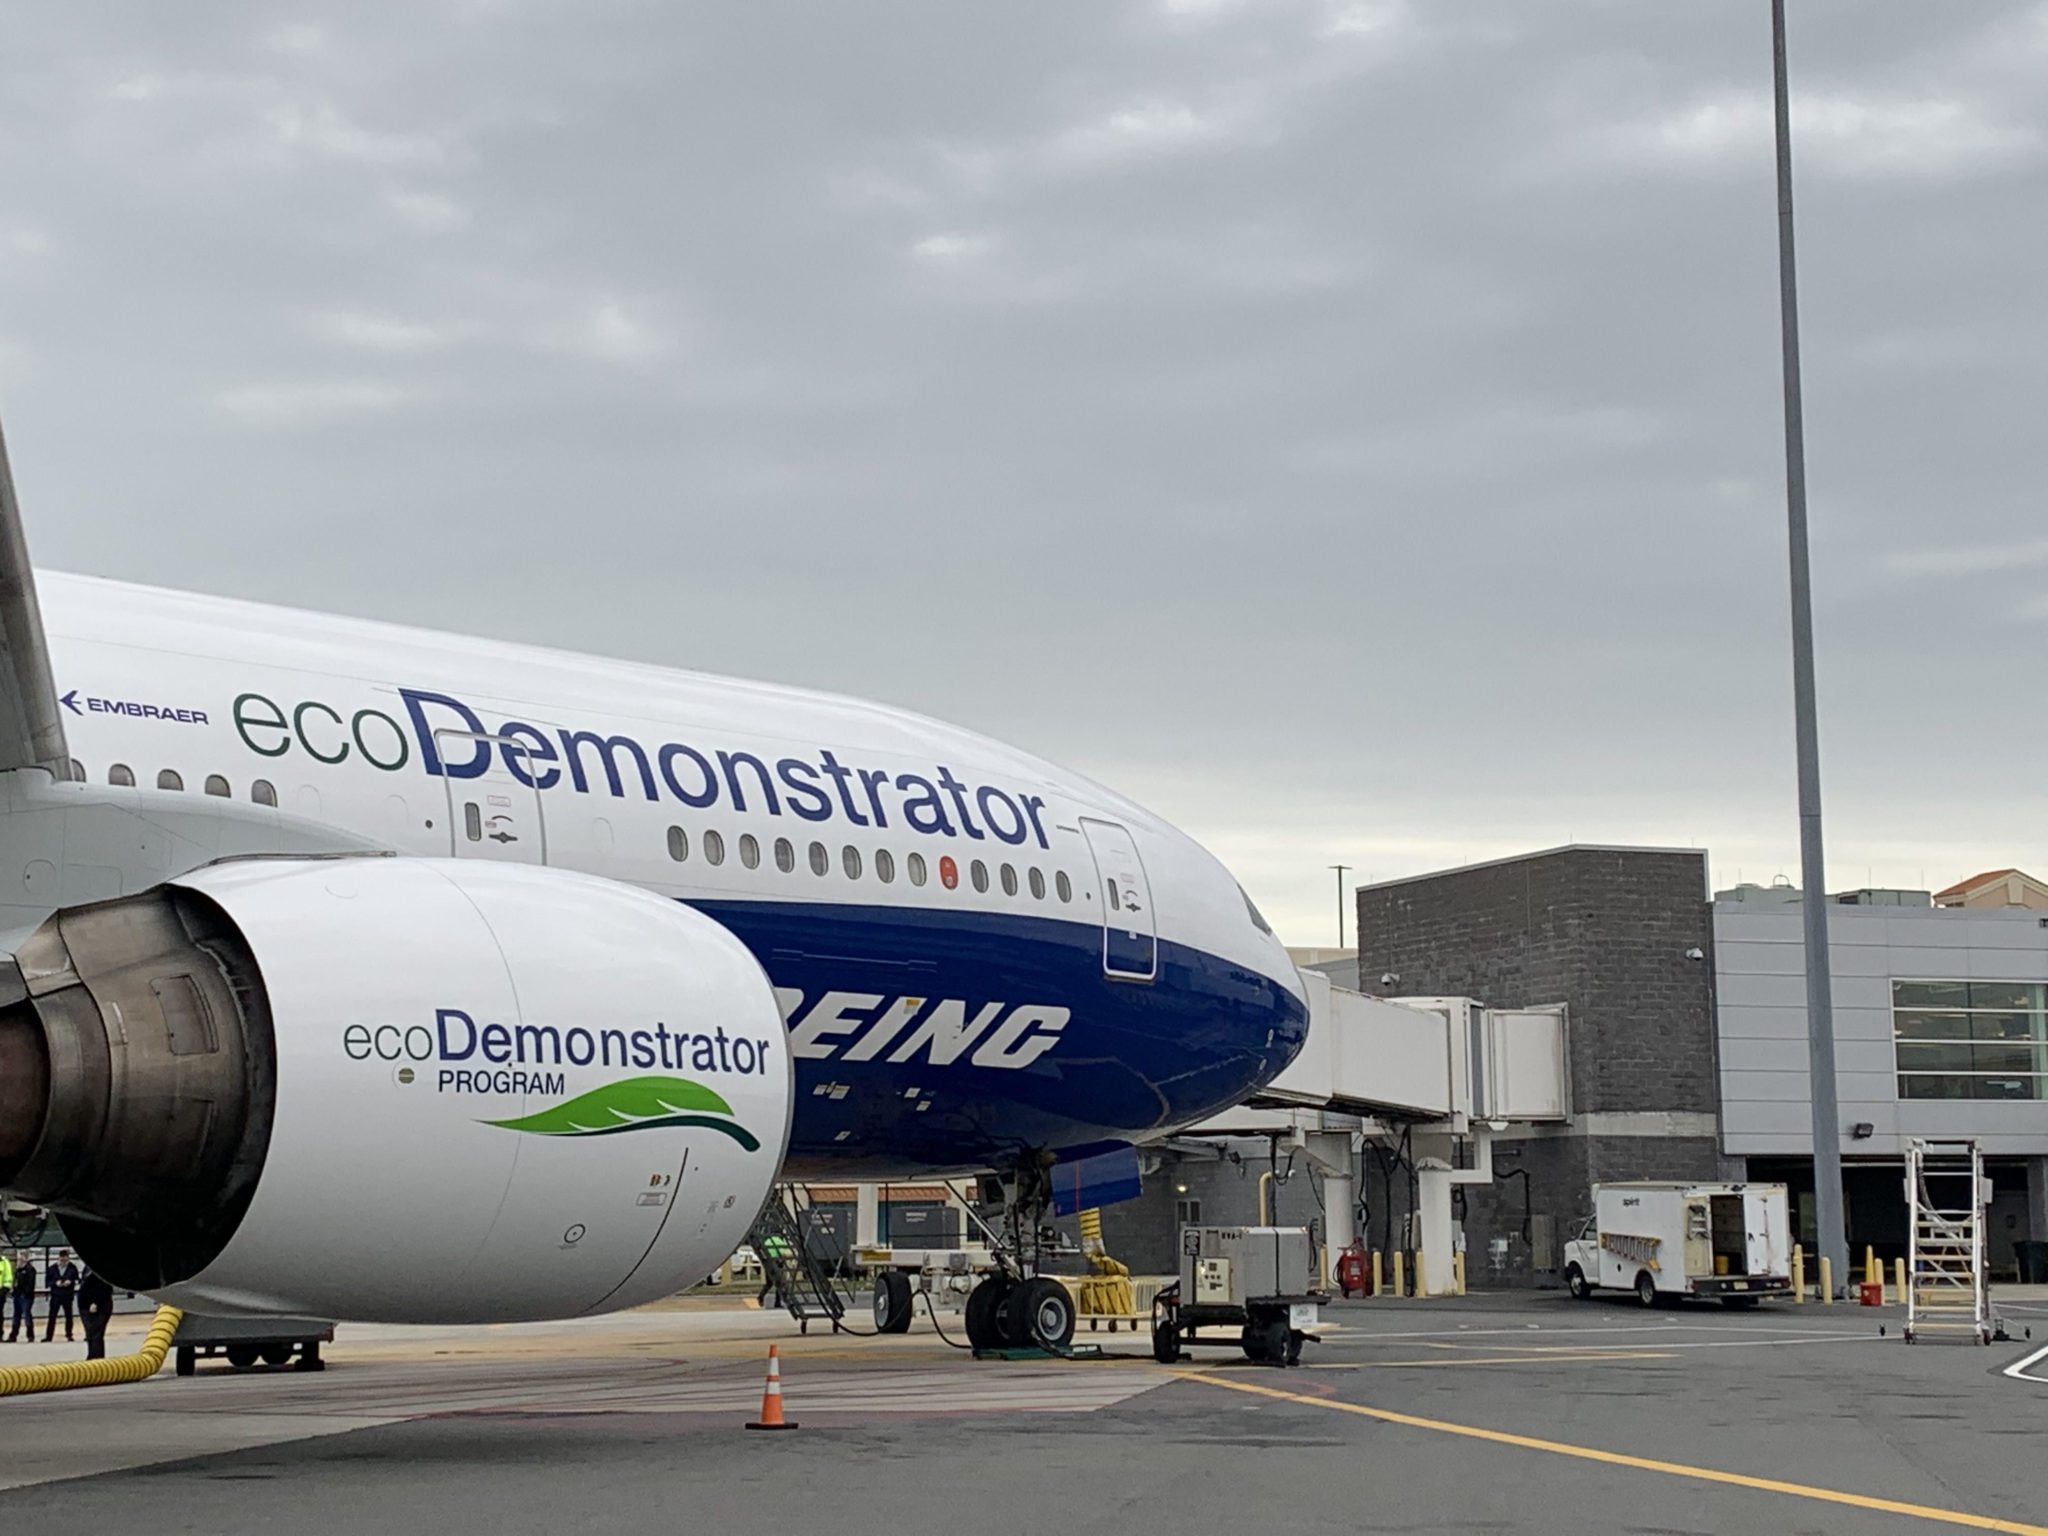 The Greater Atlantic City Chamber welcomes Boeing’s ecoDemonstrator